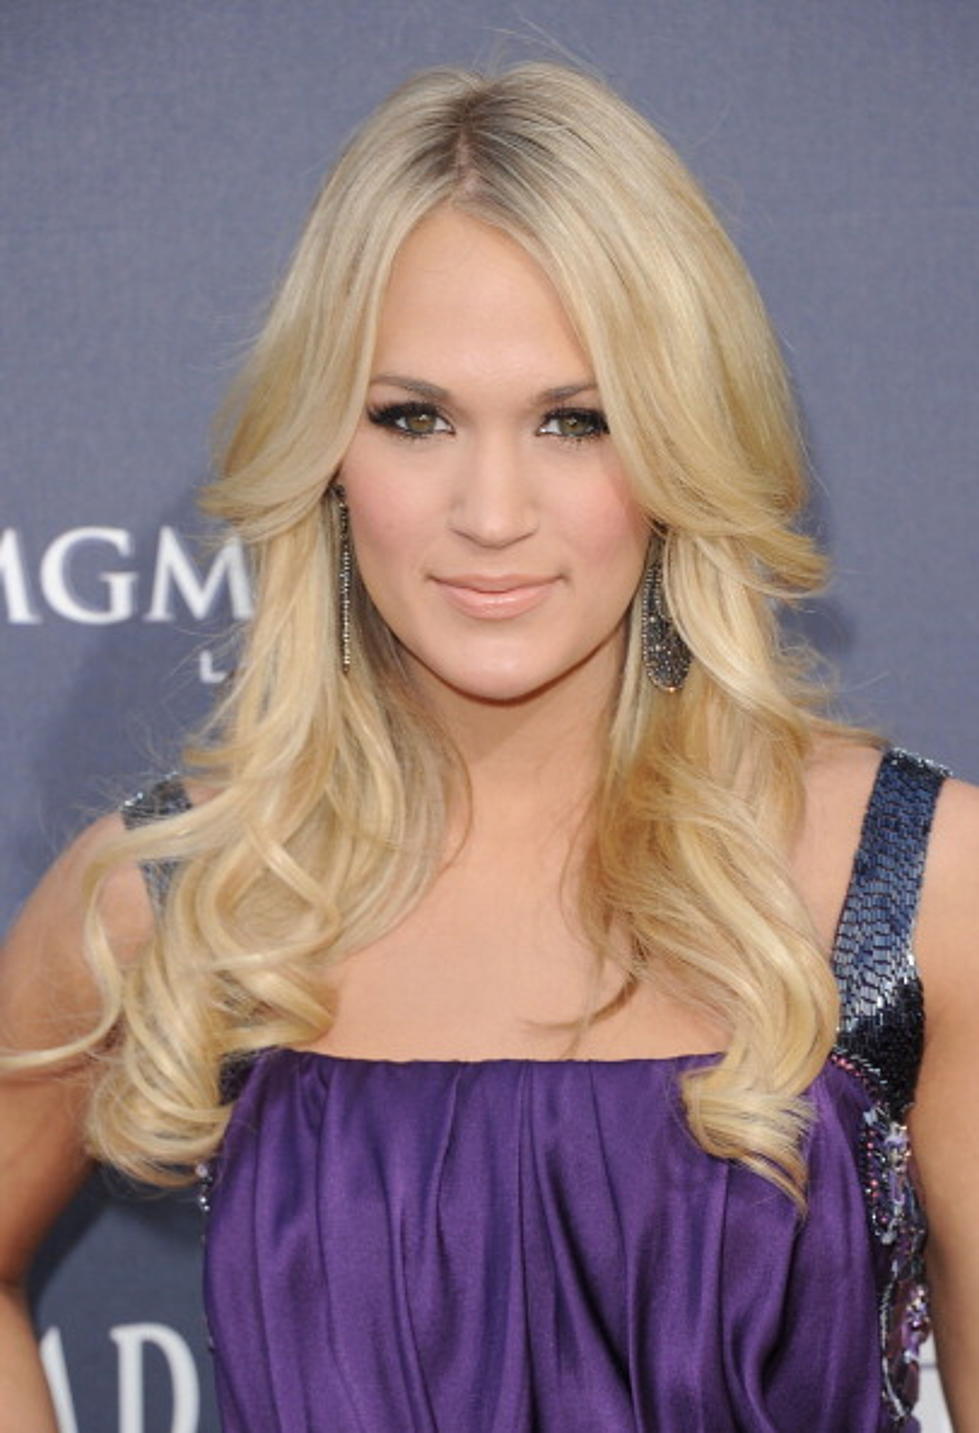 Carrie Underwood, Lee Greenwood, Johnny Cash – Today In Country Music History